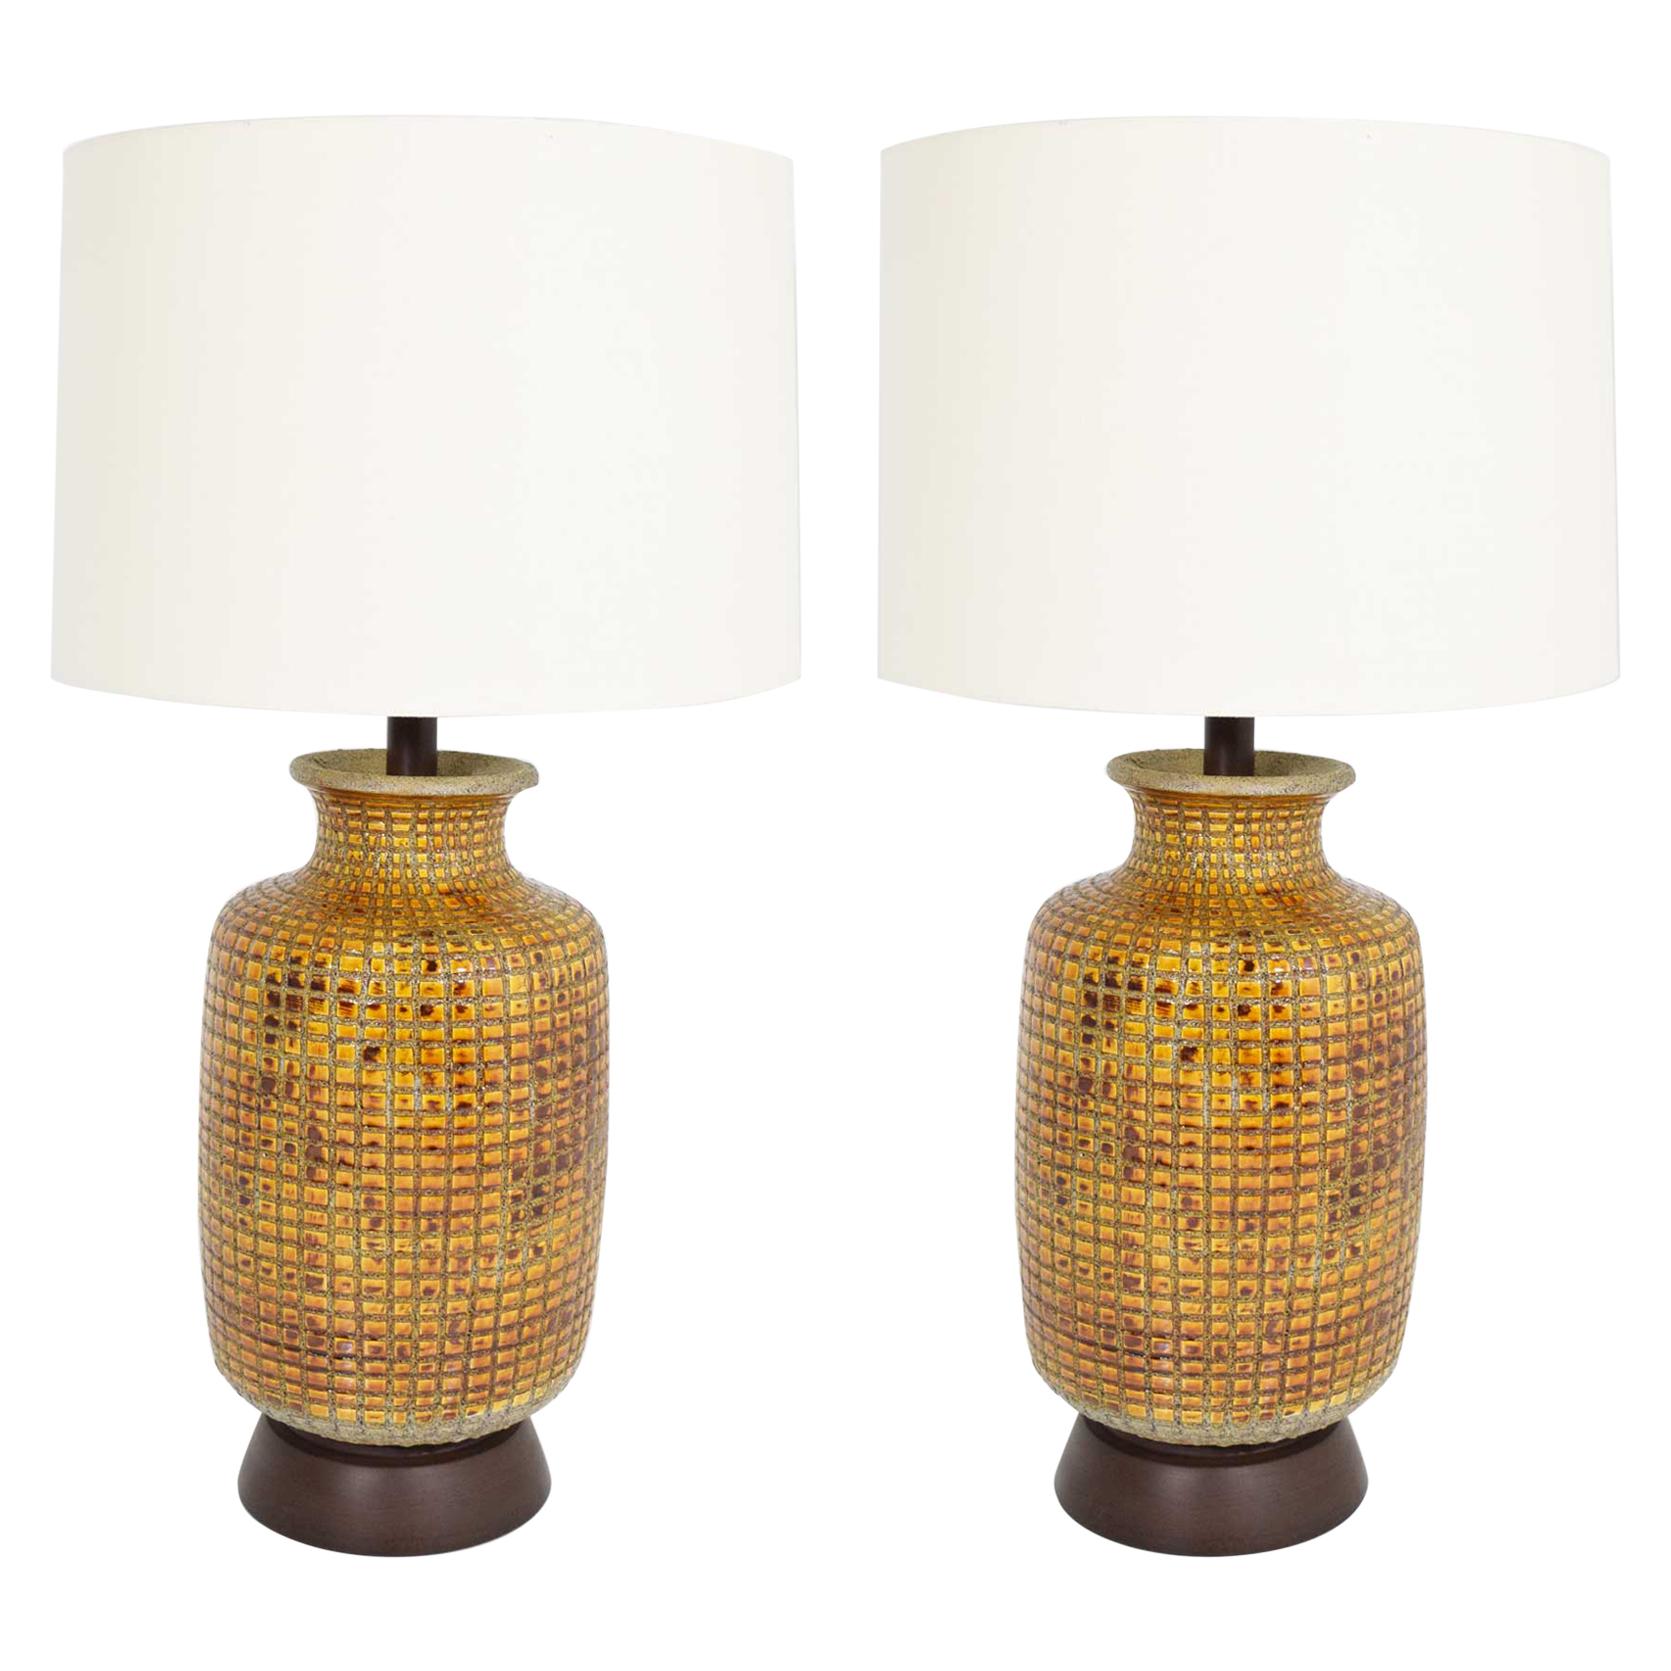 Pair of Large Midcentury Ceramic Earthernware Table Lamps